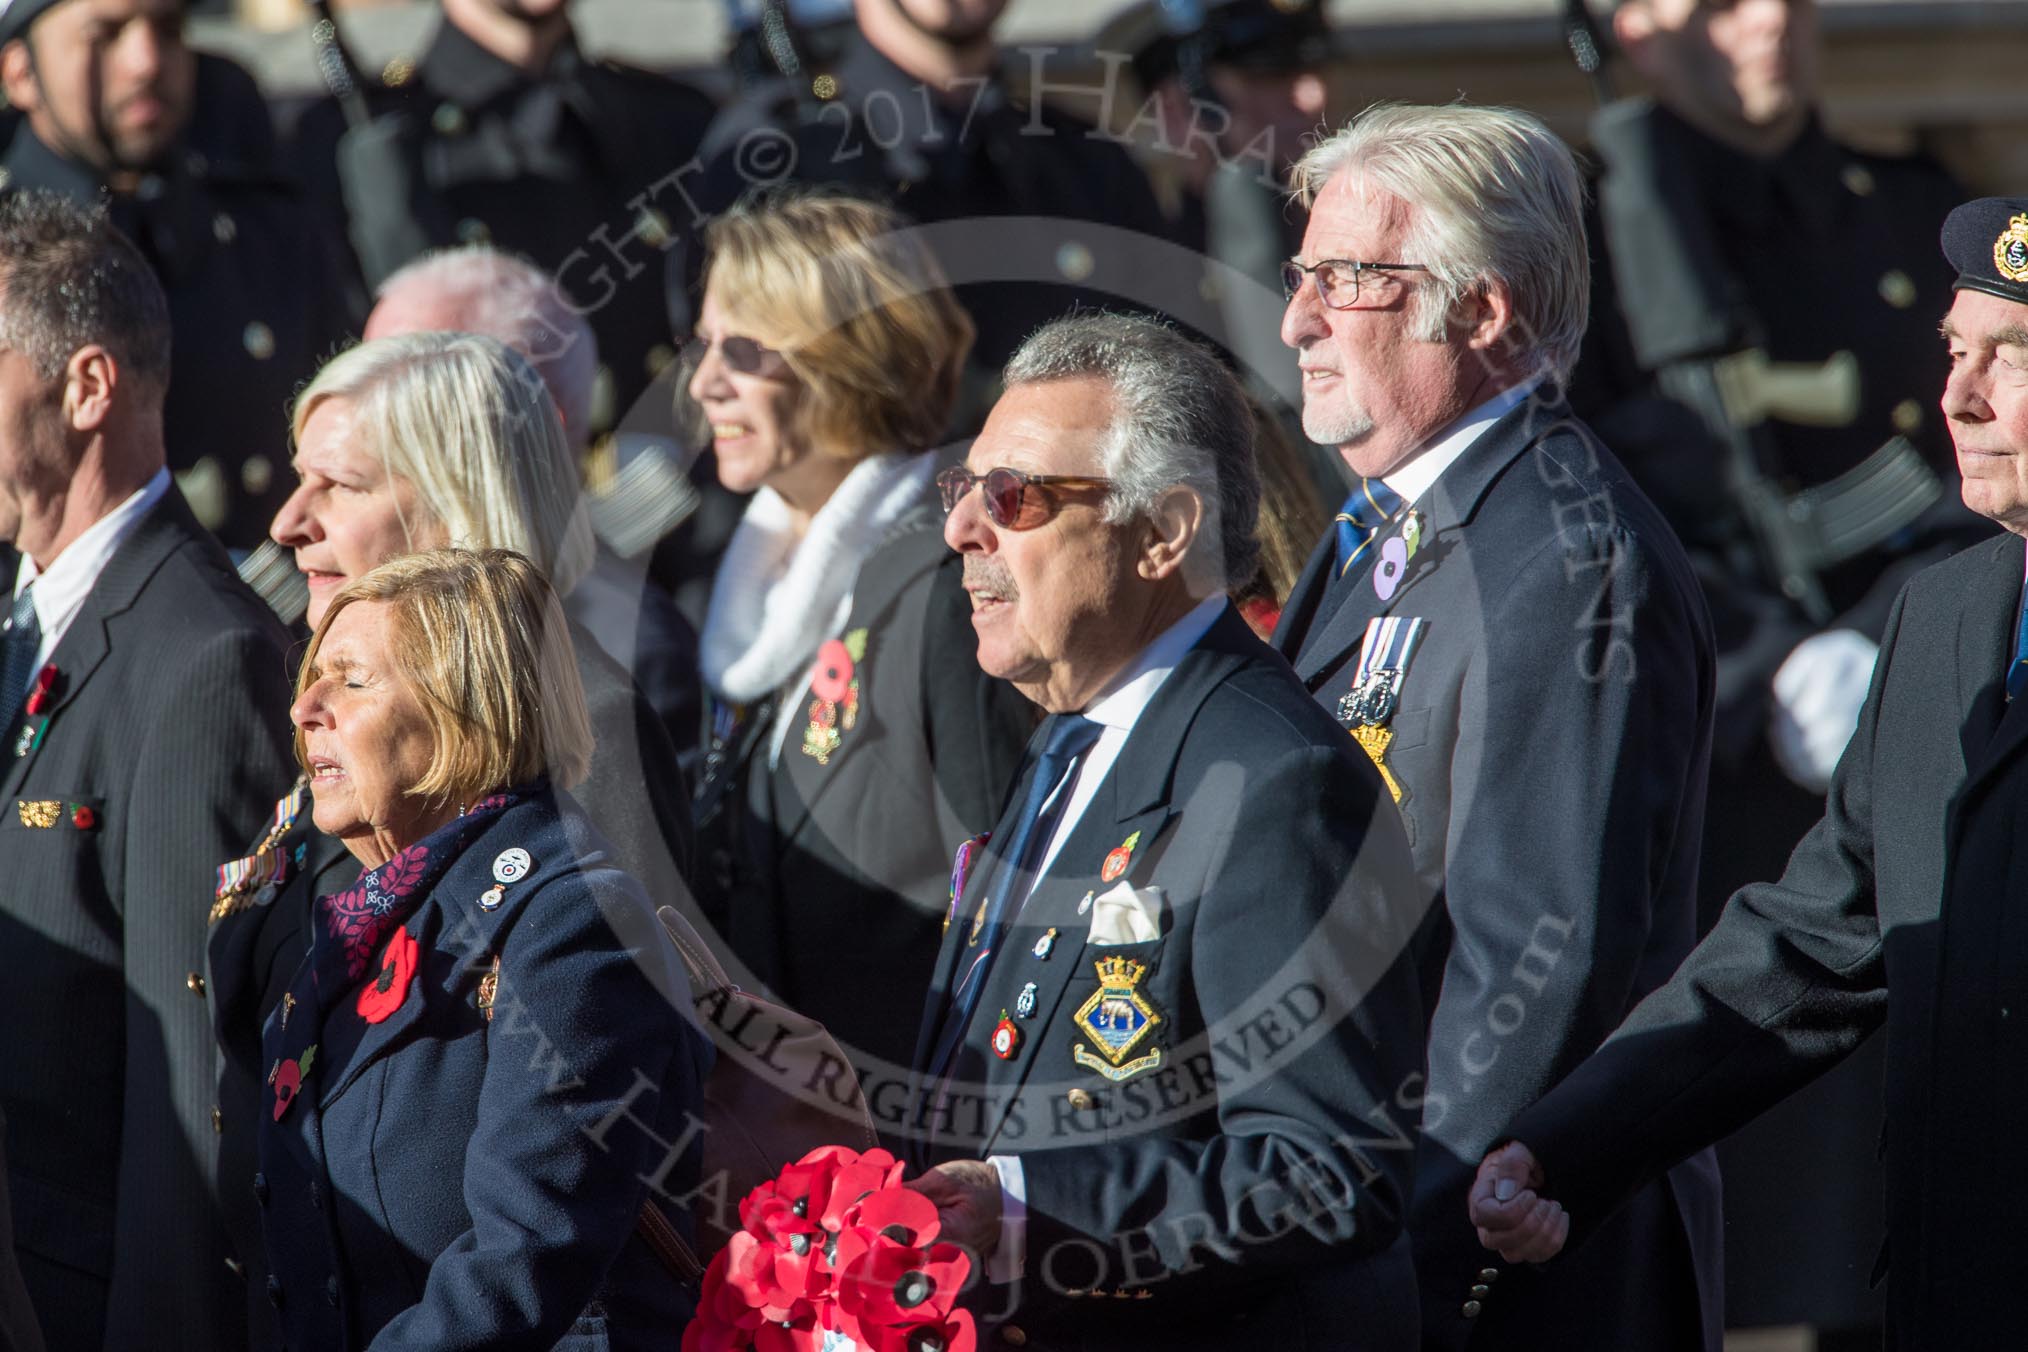 HMS Ganges Association  (Group E20, 30 members) during the Royal British Legion March Past on Remembrance Sunday at the Cenotaph, Whitehall, Westminster, London, 11 November 2018, 11:44.